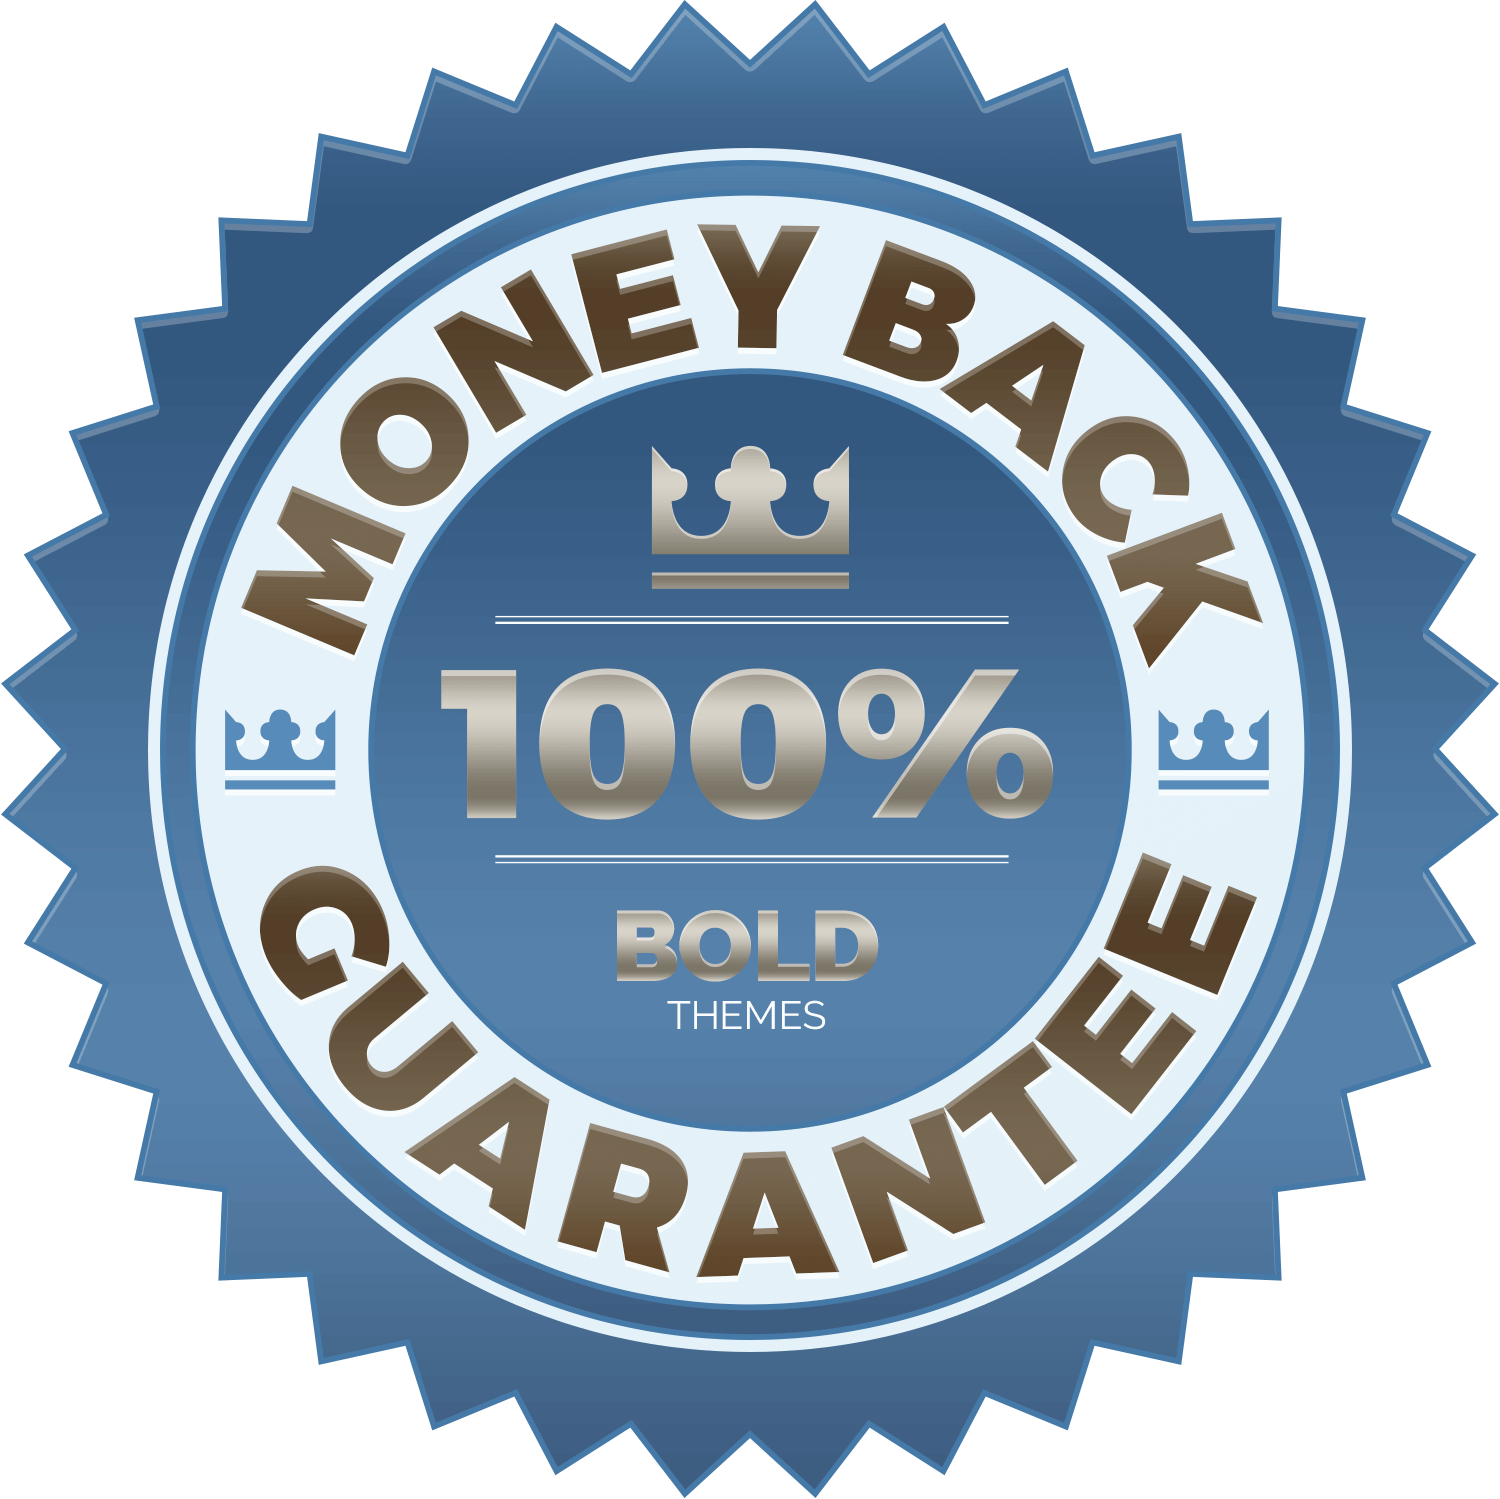 http://www.magicmob.ro/wp-content/uploads/2017/05/Money-back-guarantee.png